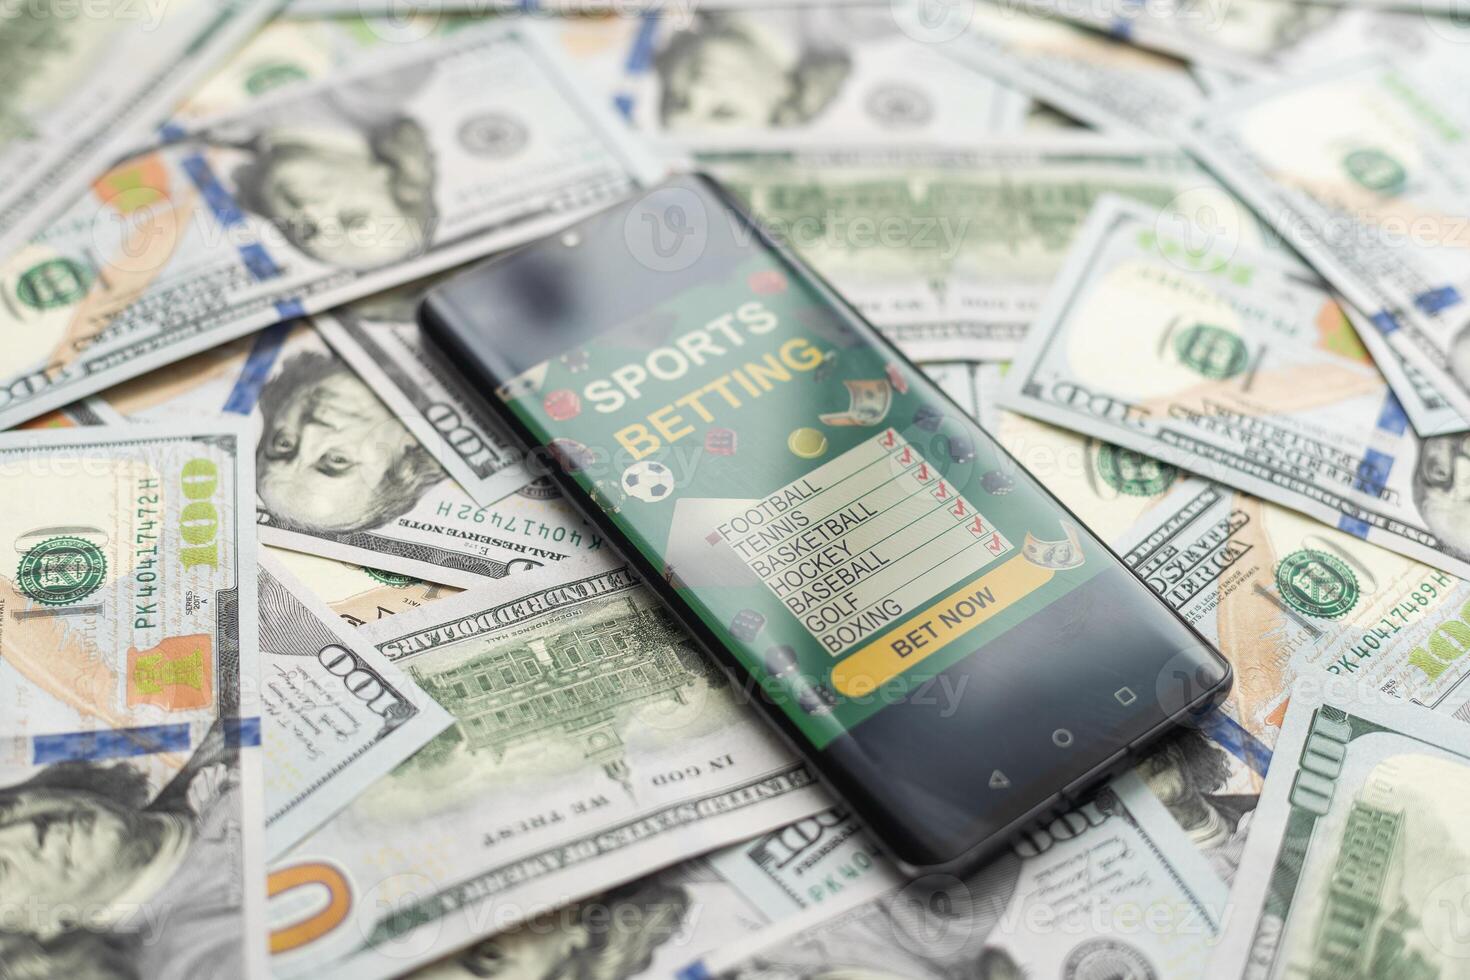 Smartphone with gambling mobile application with money close-up. Sport and betting concept photo